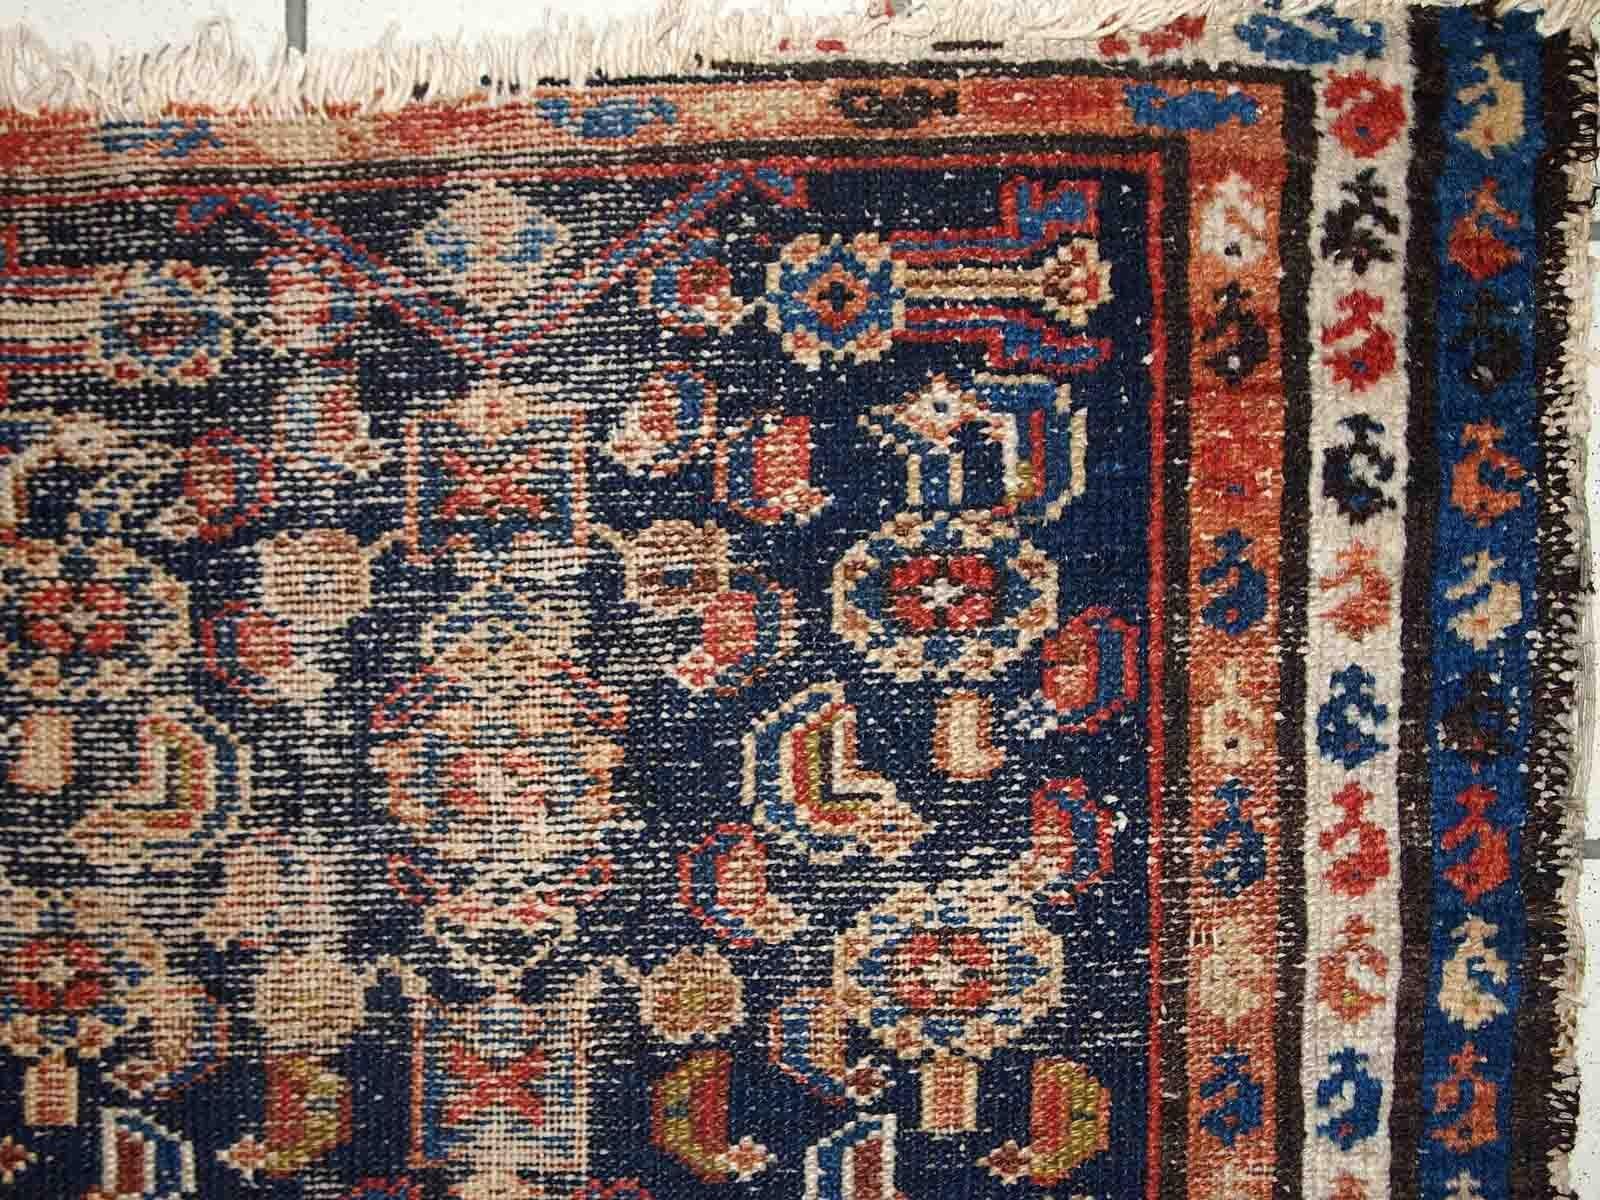 Handmade antique Middle Eastern rug in traditional design. The rug is from the beginning of 20th century in distressed condition. 

-condition: distressed,

-circa: 1900s,

-size: 2.8' x 3' (87cm x 114cm),
?
-material: wool,

-country of